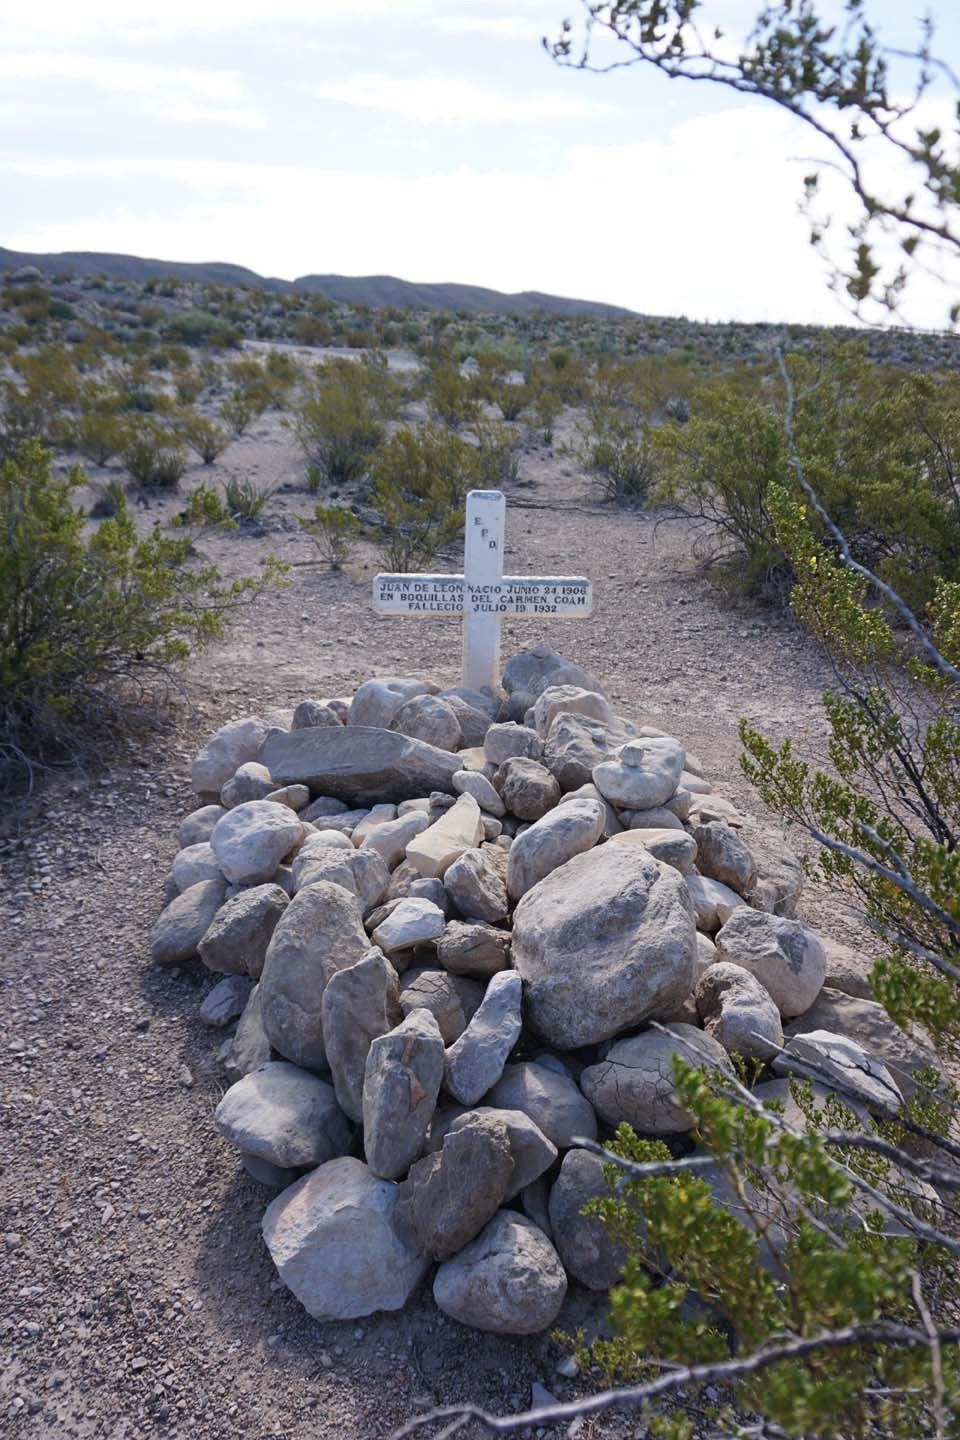 A cross headstone marks a grave with rocks piled on it.